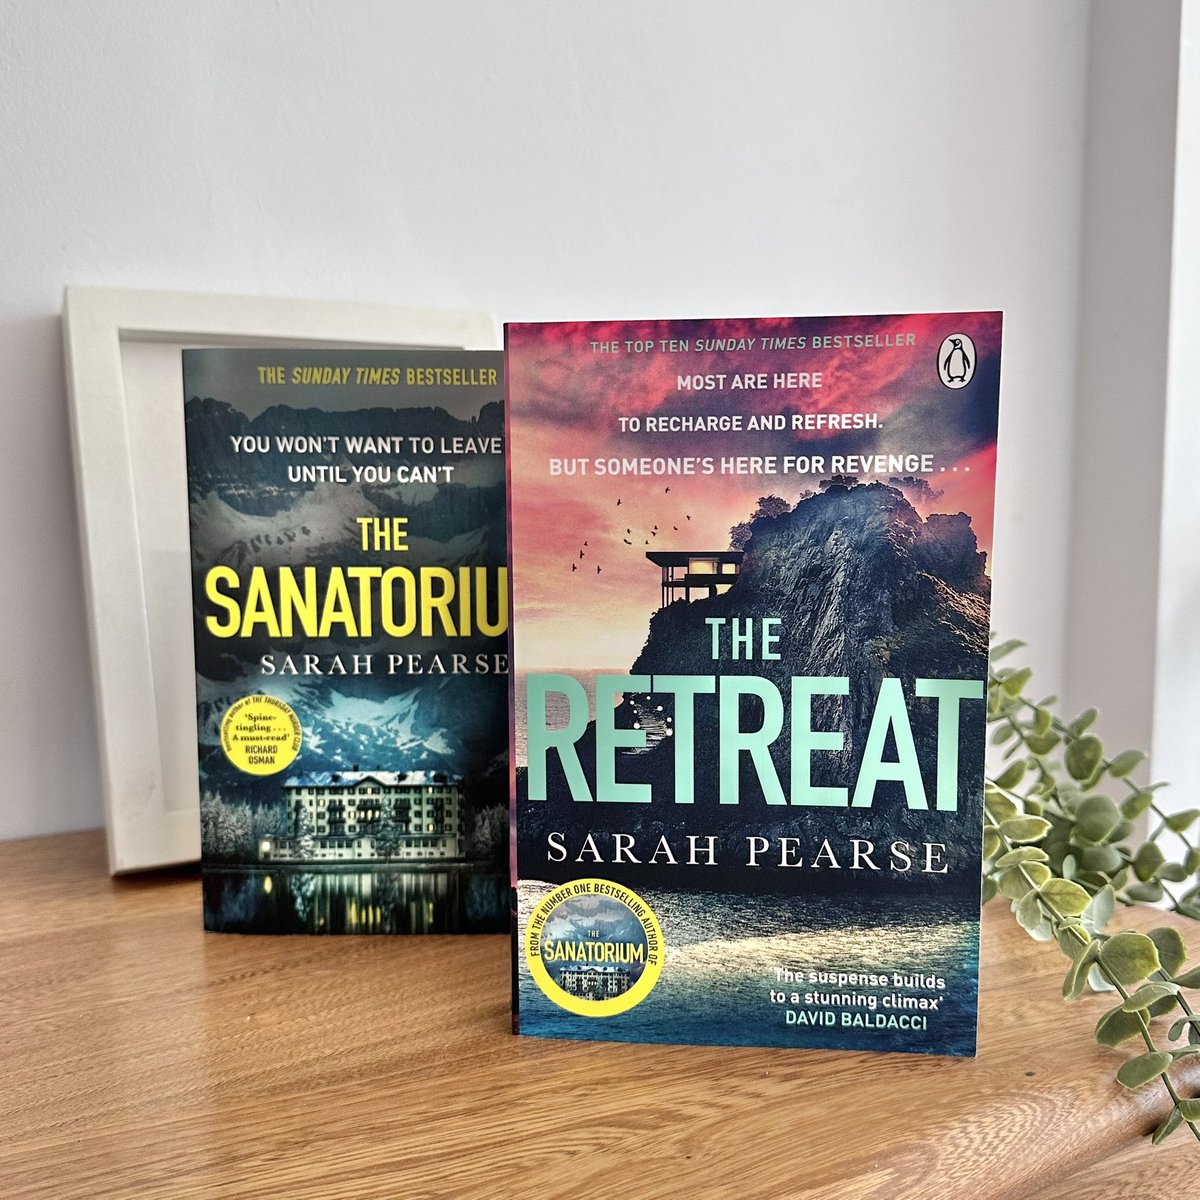 ✨ COMPETITION ✨ To celebrate the release of my new thriller #TheRetreat on June 22nd, I’m giving away signed paperback copies of both books and a ✨ £50 Book Token! ✨ Like & retweet the post - UK only, CLOSES Friday July 7th.